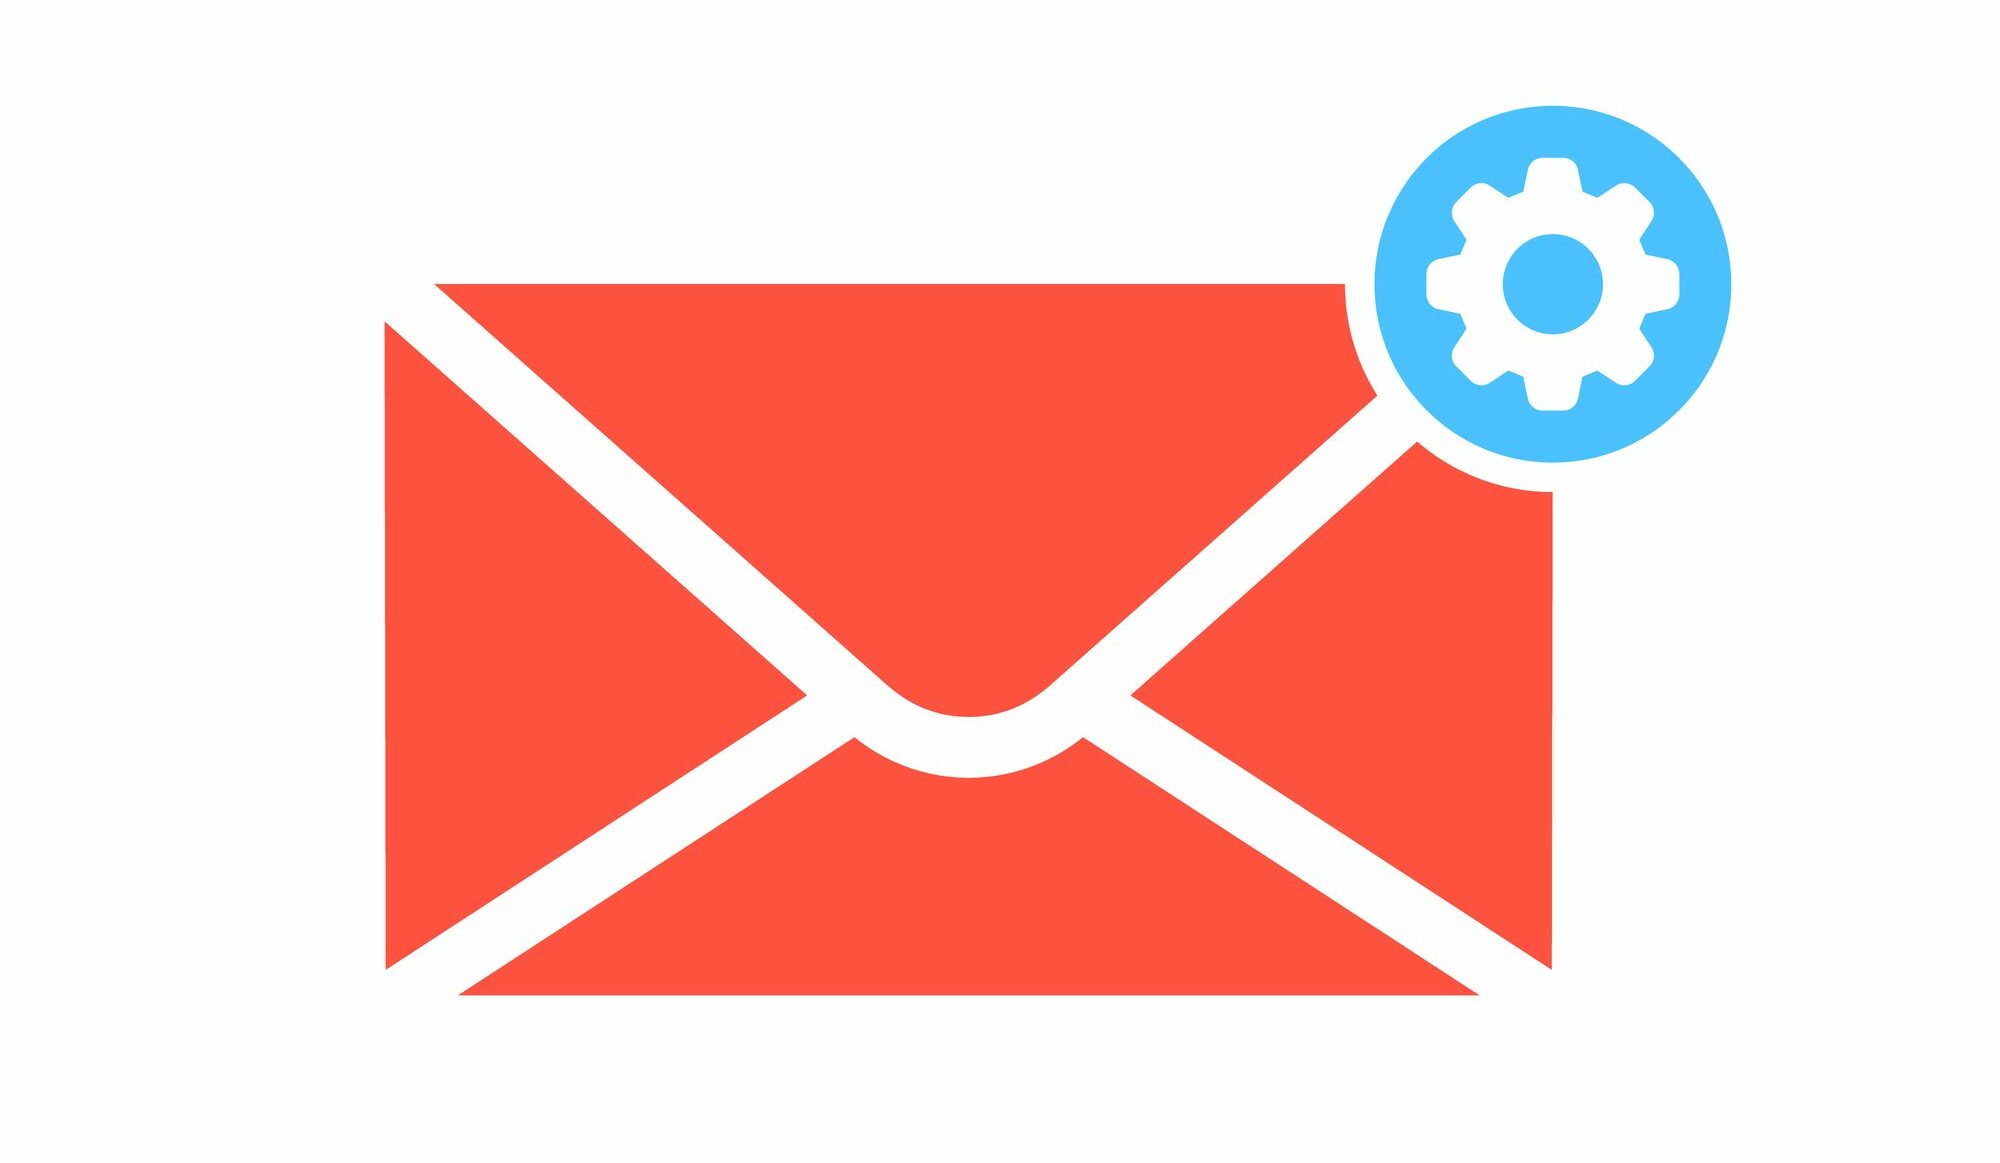 vector image of an envelope (email icon) with a gear on the upper right corner to symbolize changing email settings